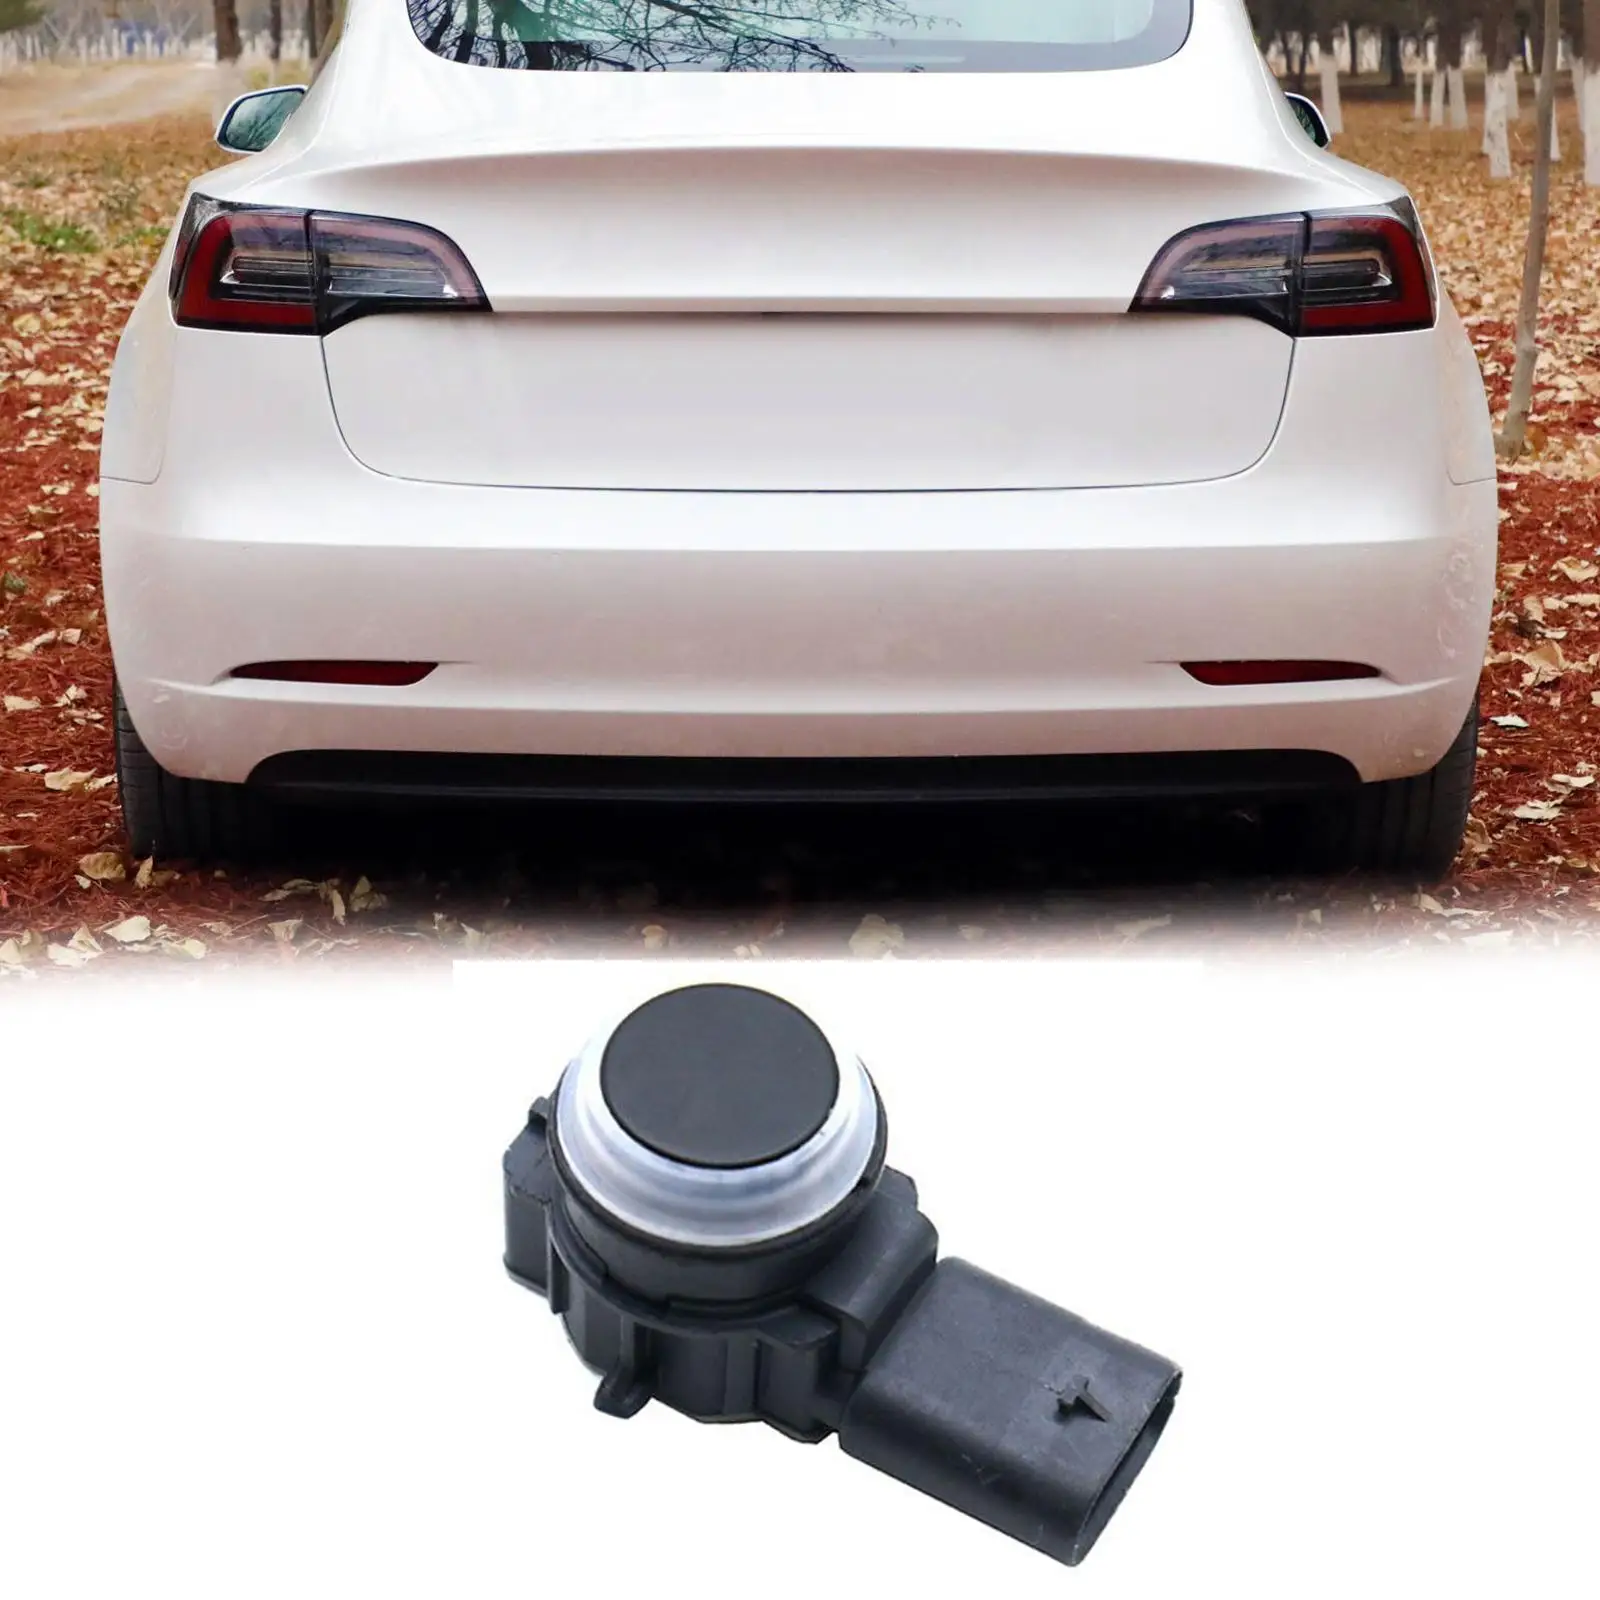 Front Parking Sensor Assist PDC 1048474-01-a Direct Replaces Durable Black High Performance Accessories for Tesla Model S